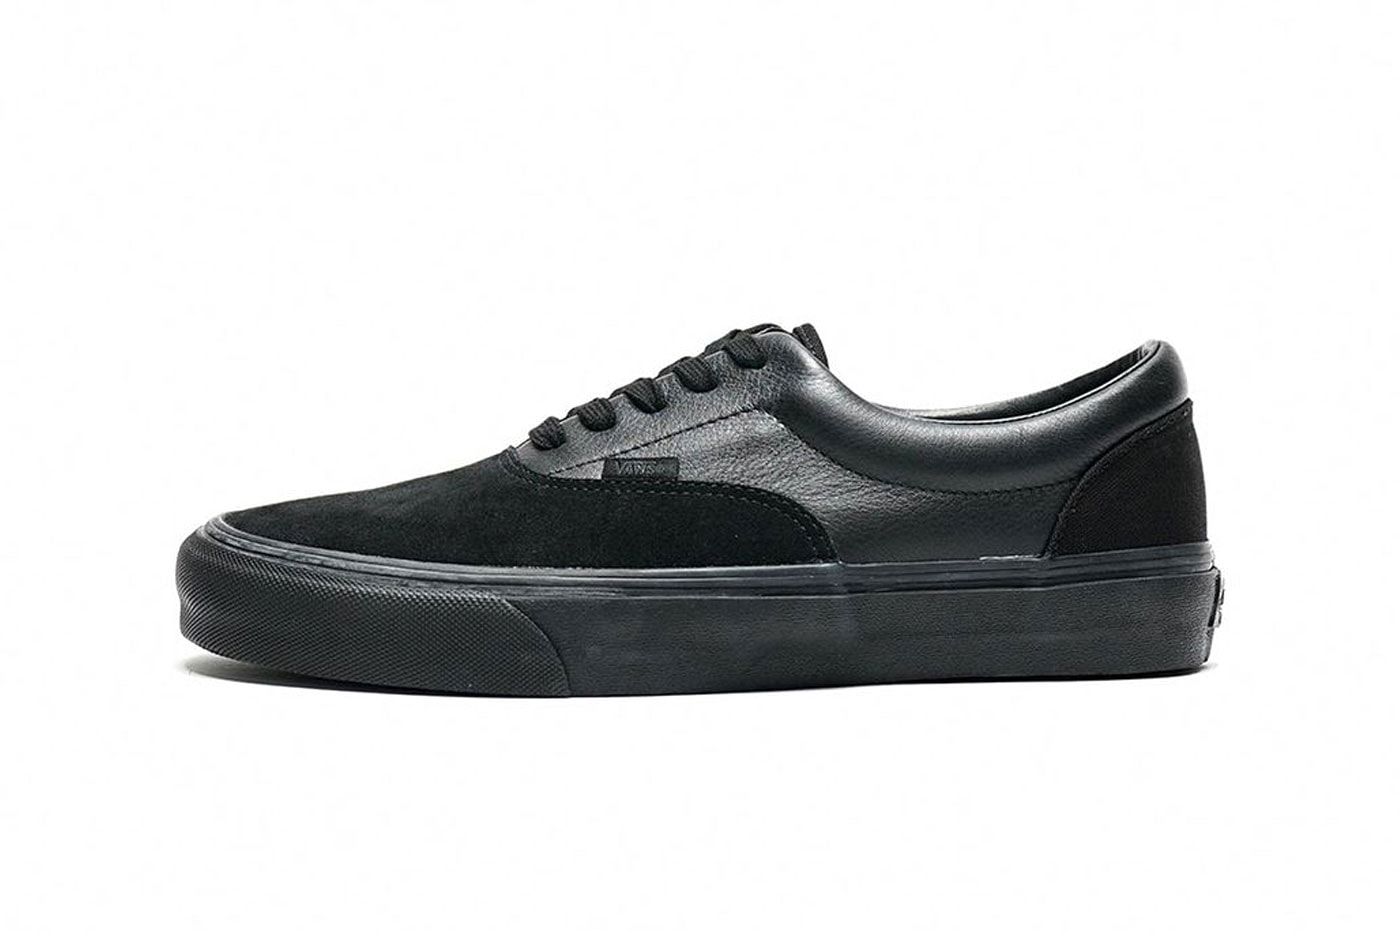 engineered garments vault by vans era collab three years reunite laceless mismatched black white beige suede leather canvas release info date price